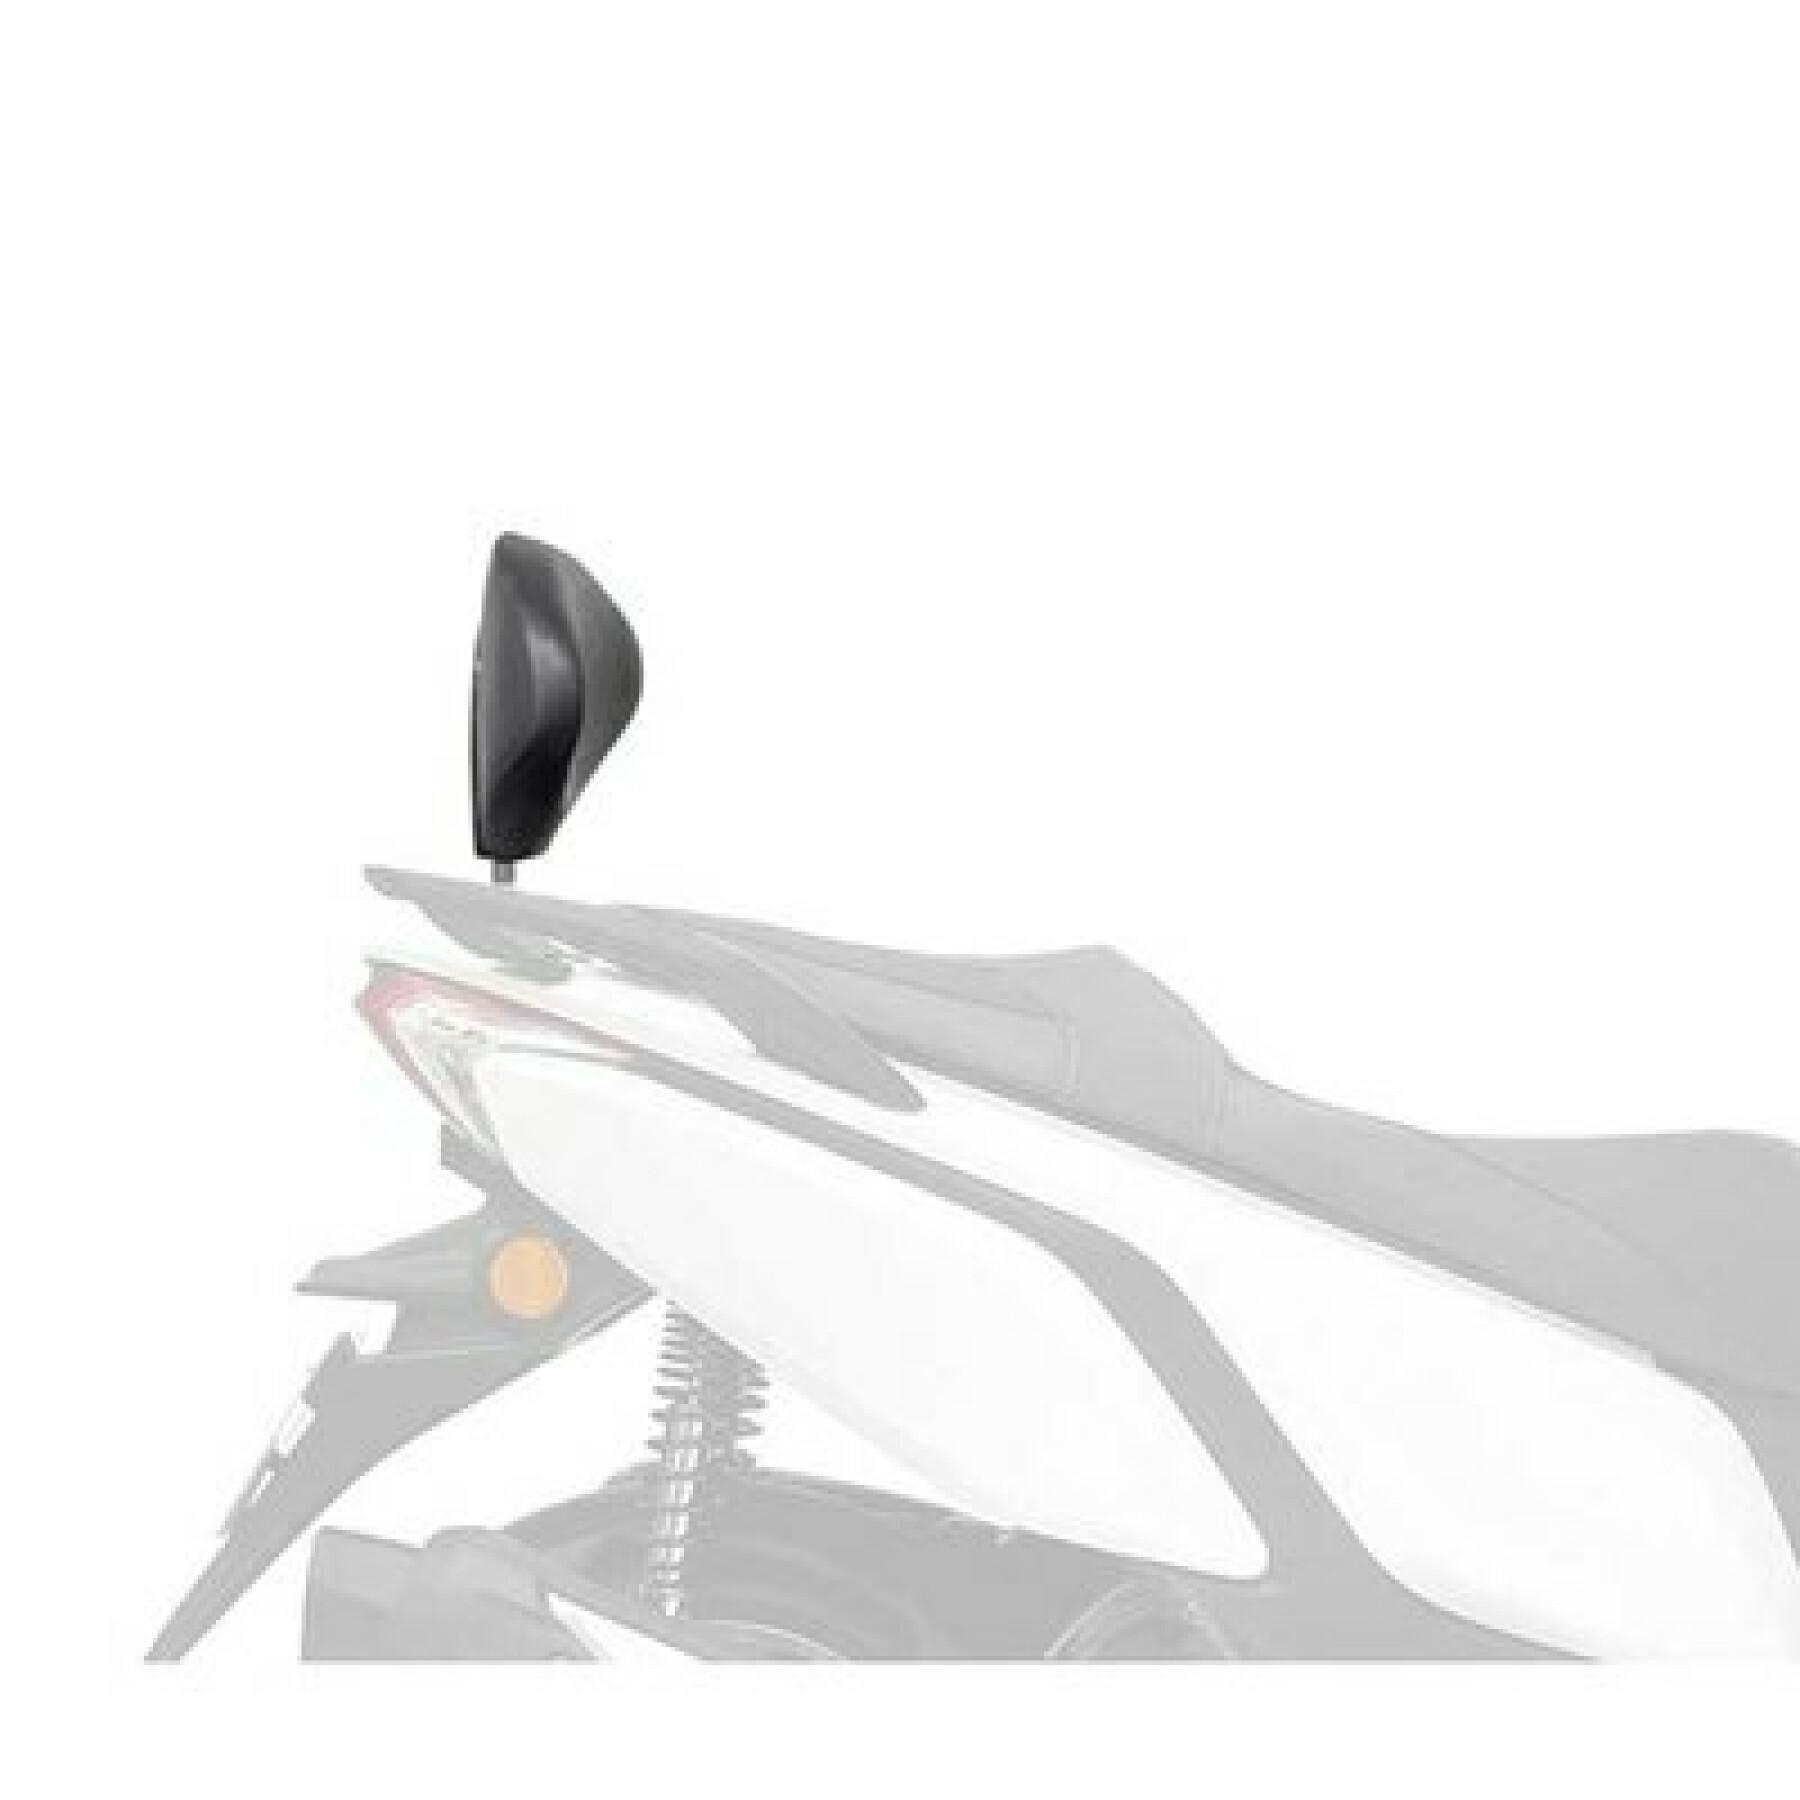 Scooter backrest attachment Shad daelim xq1 125/250